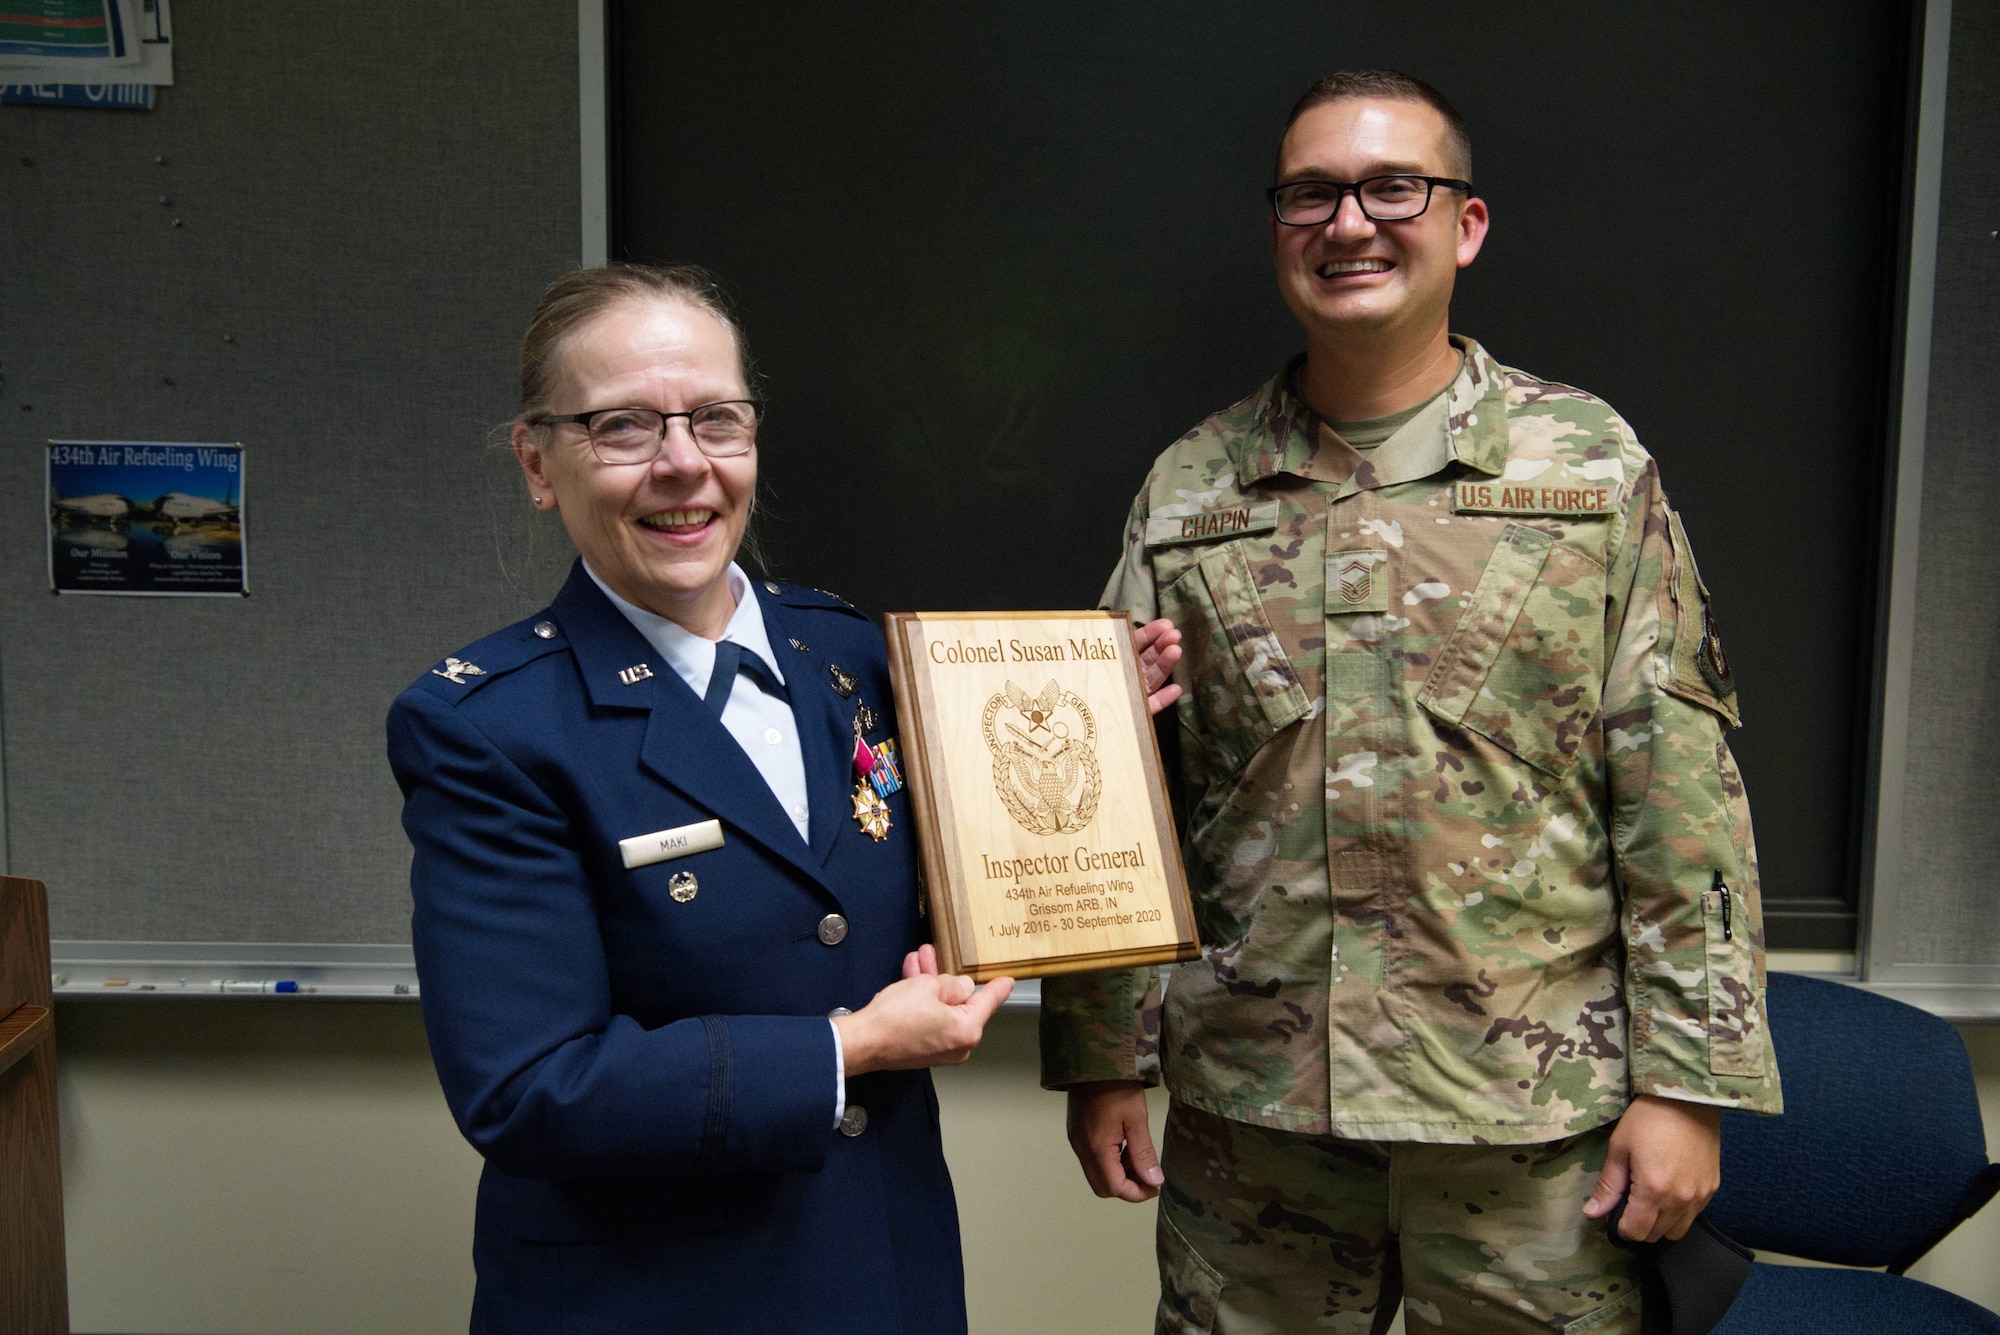 Master Sgt. Zach Chapin, 434th Air Refueling Wing inspections superintendent, presents a gift to Col. Susan Maki, 434th ARW inspector general, at a retirement ceremony at Grissom Air Reserve Base, Ind., Sept. 12, 2020. Maki retired after 32 years of service in the Minnesota Air Guard and Air Force Reserve. (U.S. Air Force Photo / A1C Harrison Withrow)